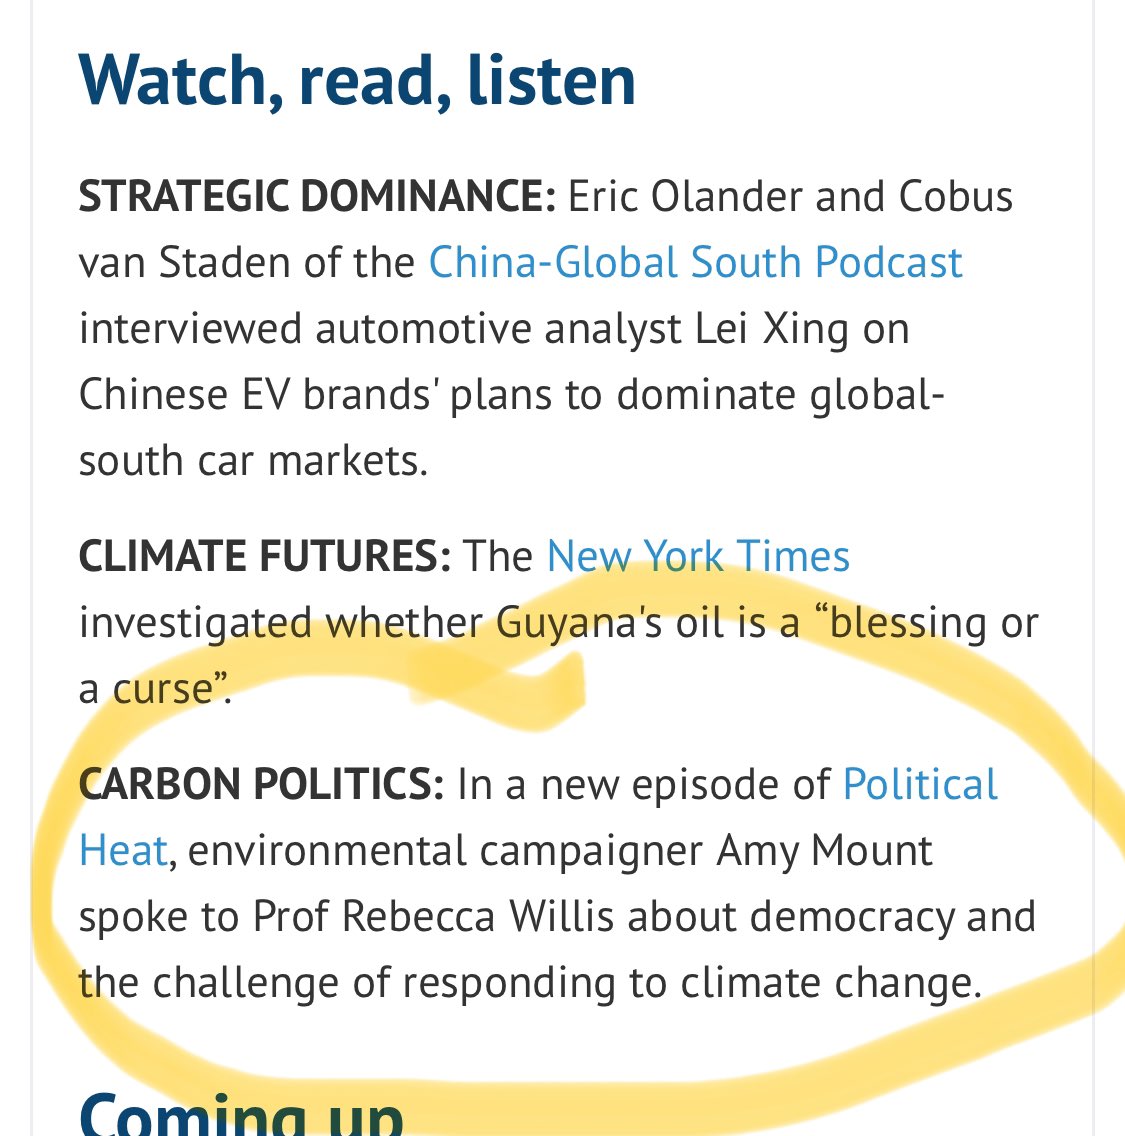 Exciting to see the Political Heat episode with @Bankfieldbecky recommended in @CarbonBrief’s weekly newsletter! (Which is itself a great read - sign up here: carbonbrief.org)